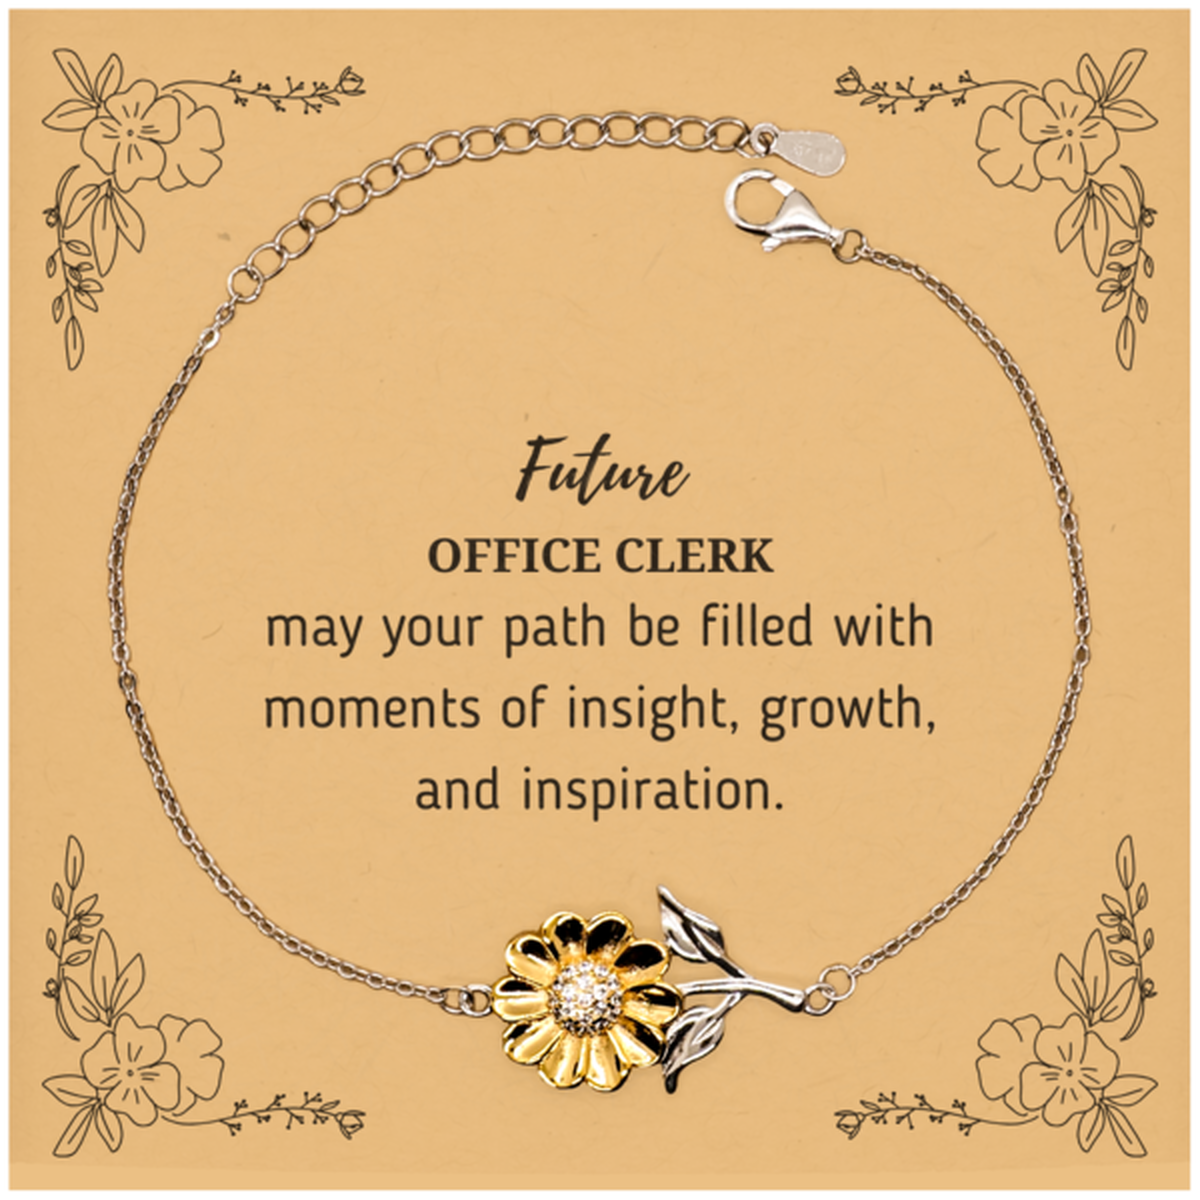 Future Office Clerk Gifts, May your path be filled with moments of insight, Graduation Gifts for New Office Clerk, Christmas Unique Sunflower Bracelet For Men, Women, Friends